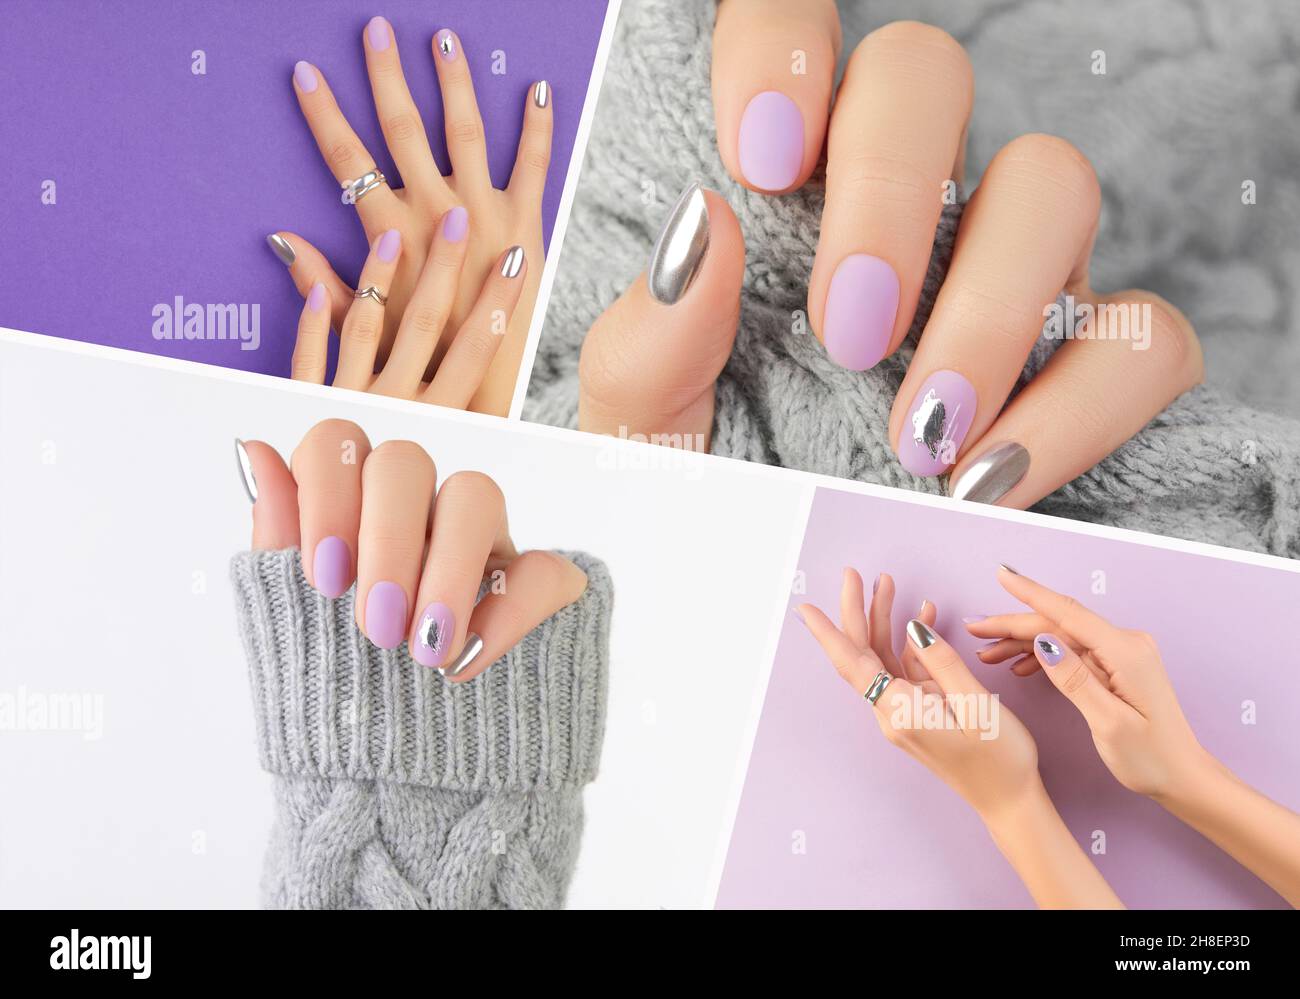 A Diverse Range of Nail Design.Collage by Nail Art Stock Photo - Image of  collage, manicure: 142514200